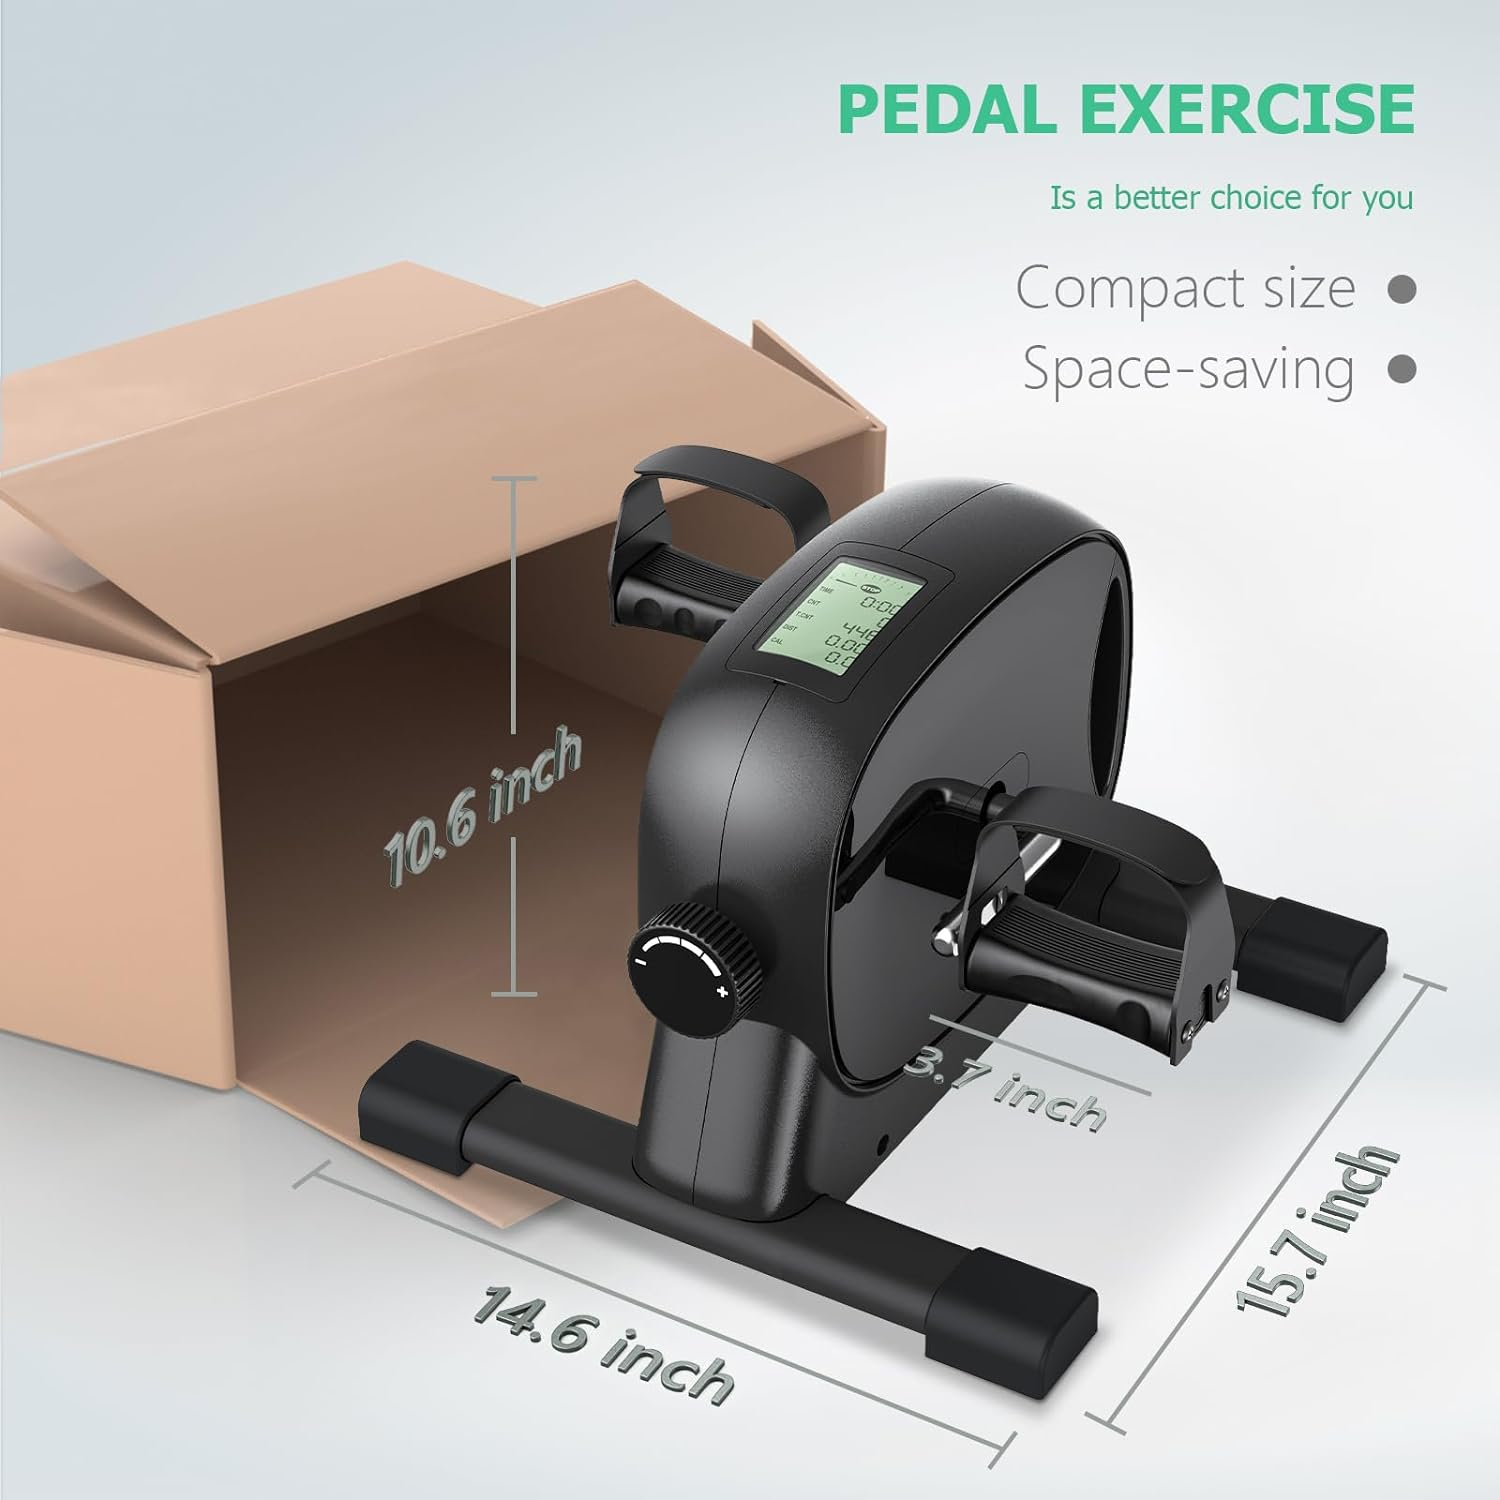 Cyclace Under Desk Bike Pedal Exerciser for Arm/Leg Exercise - Portable Mini Exercise Bike Desk Cycle, Leg Exerciser for Home/Office Workout